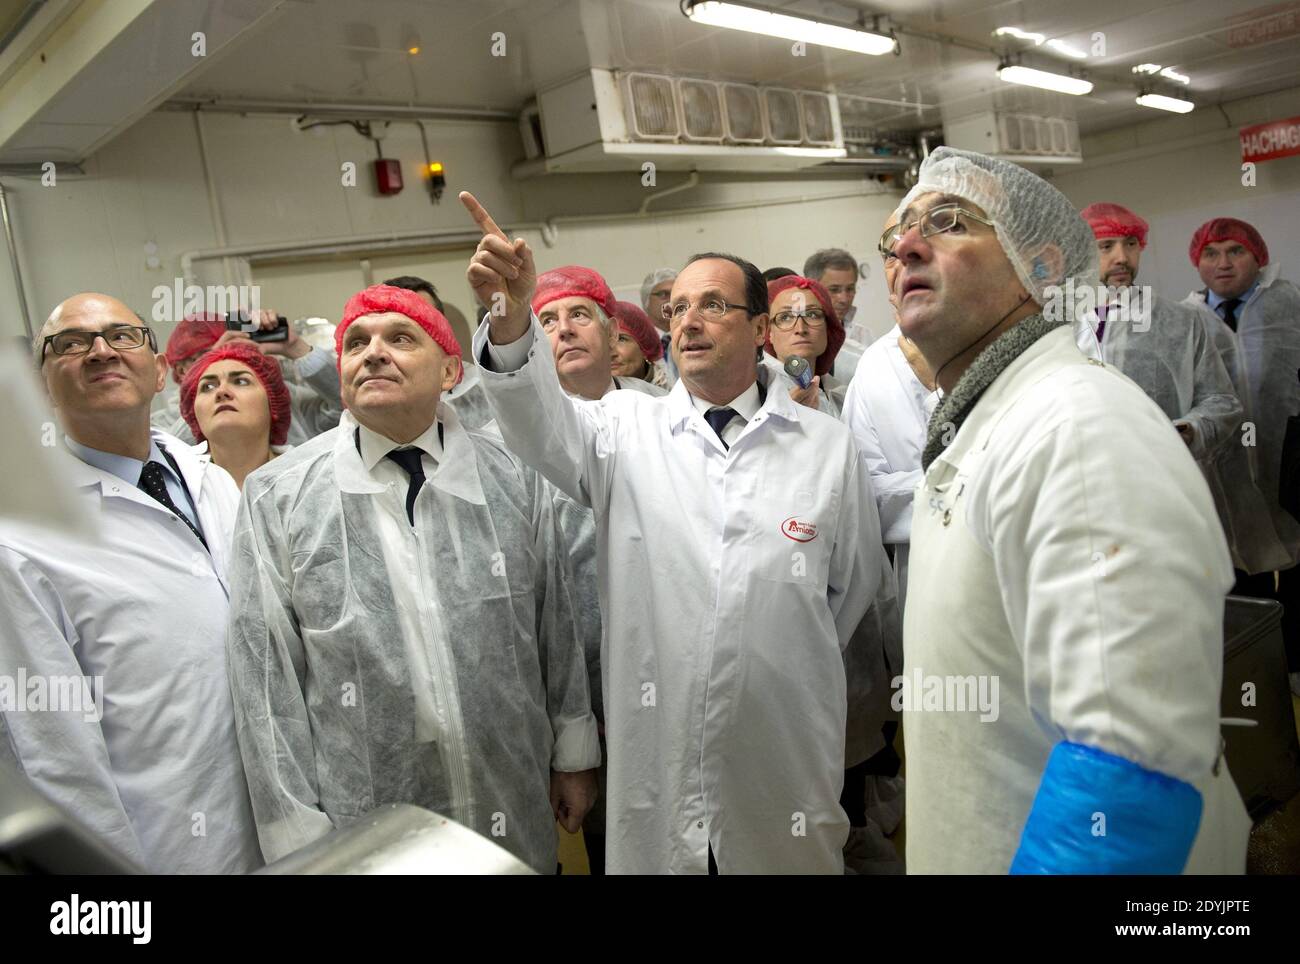 France's President Francois Hollande tours the Jean-Louis Amiotte meat and  sausage factory during a trip to the Doubs departement focused on  employement in rural areas in Avoudrey, France on May 3, 2013.